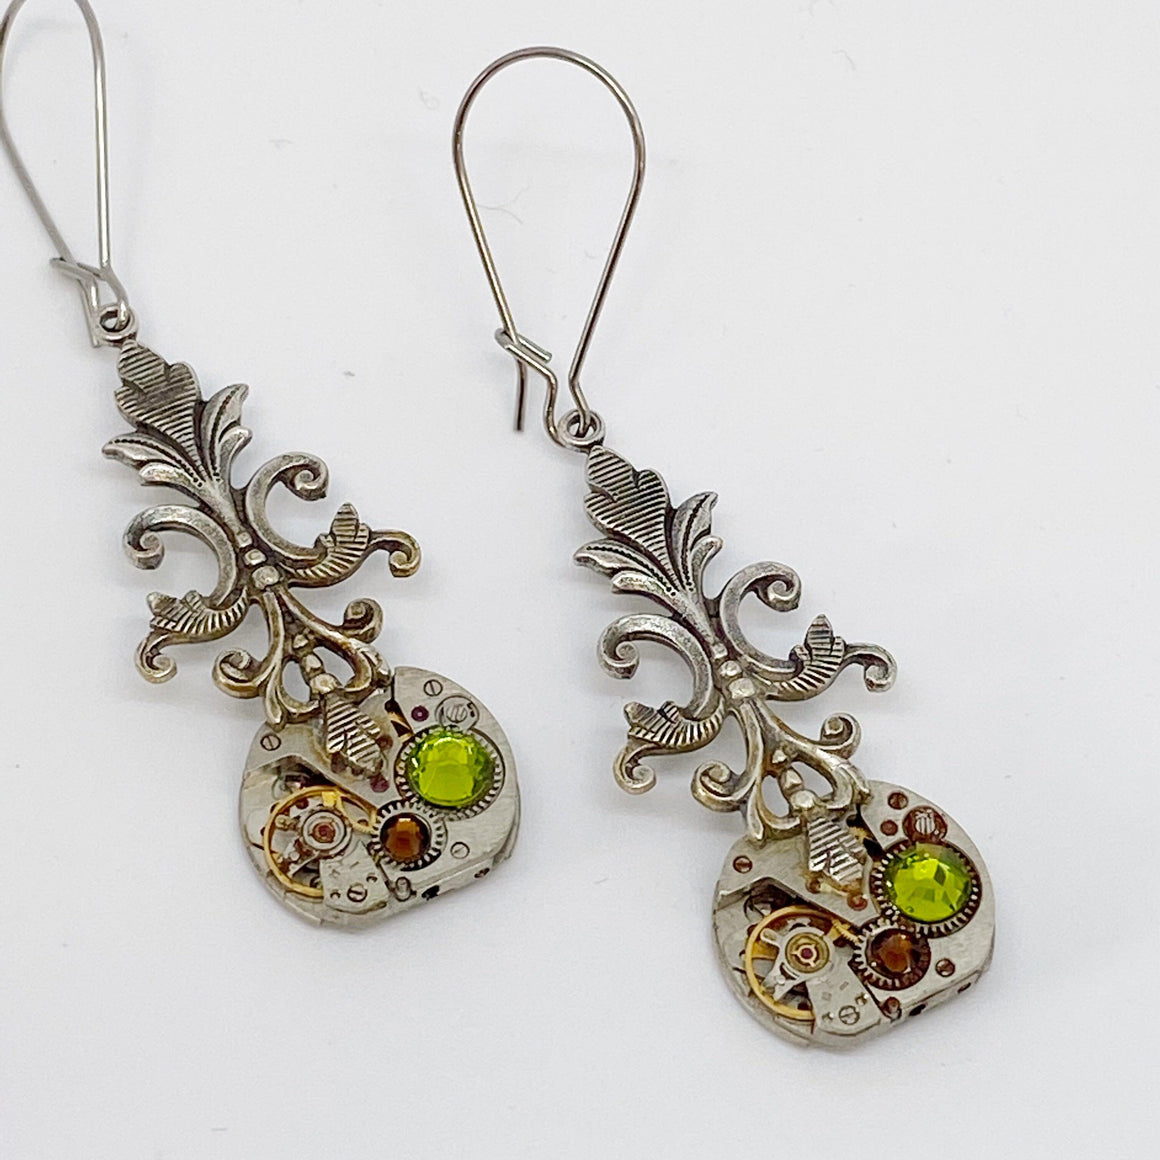 Viola, Victorian Filigree Earrings - The Victorian Magpie